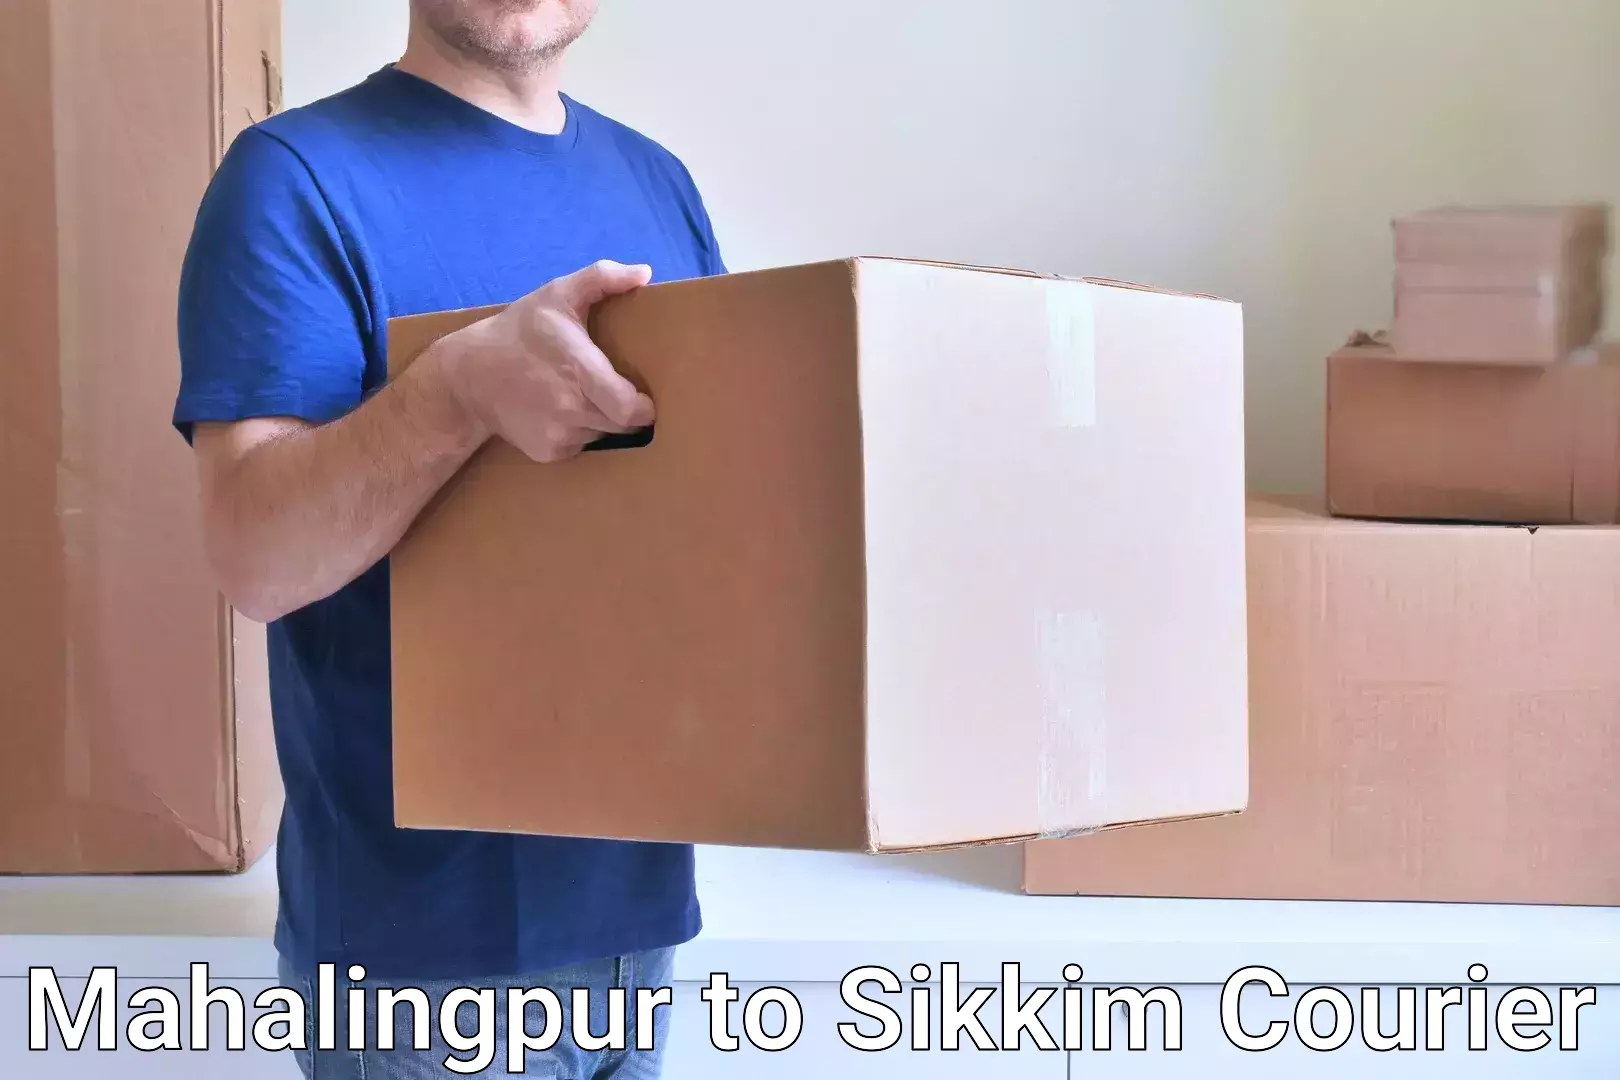 Package delivery network Mahalingpur to Sikkim